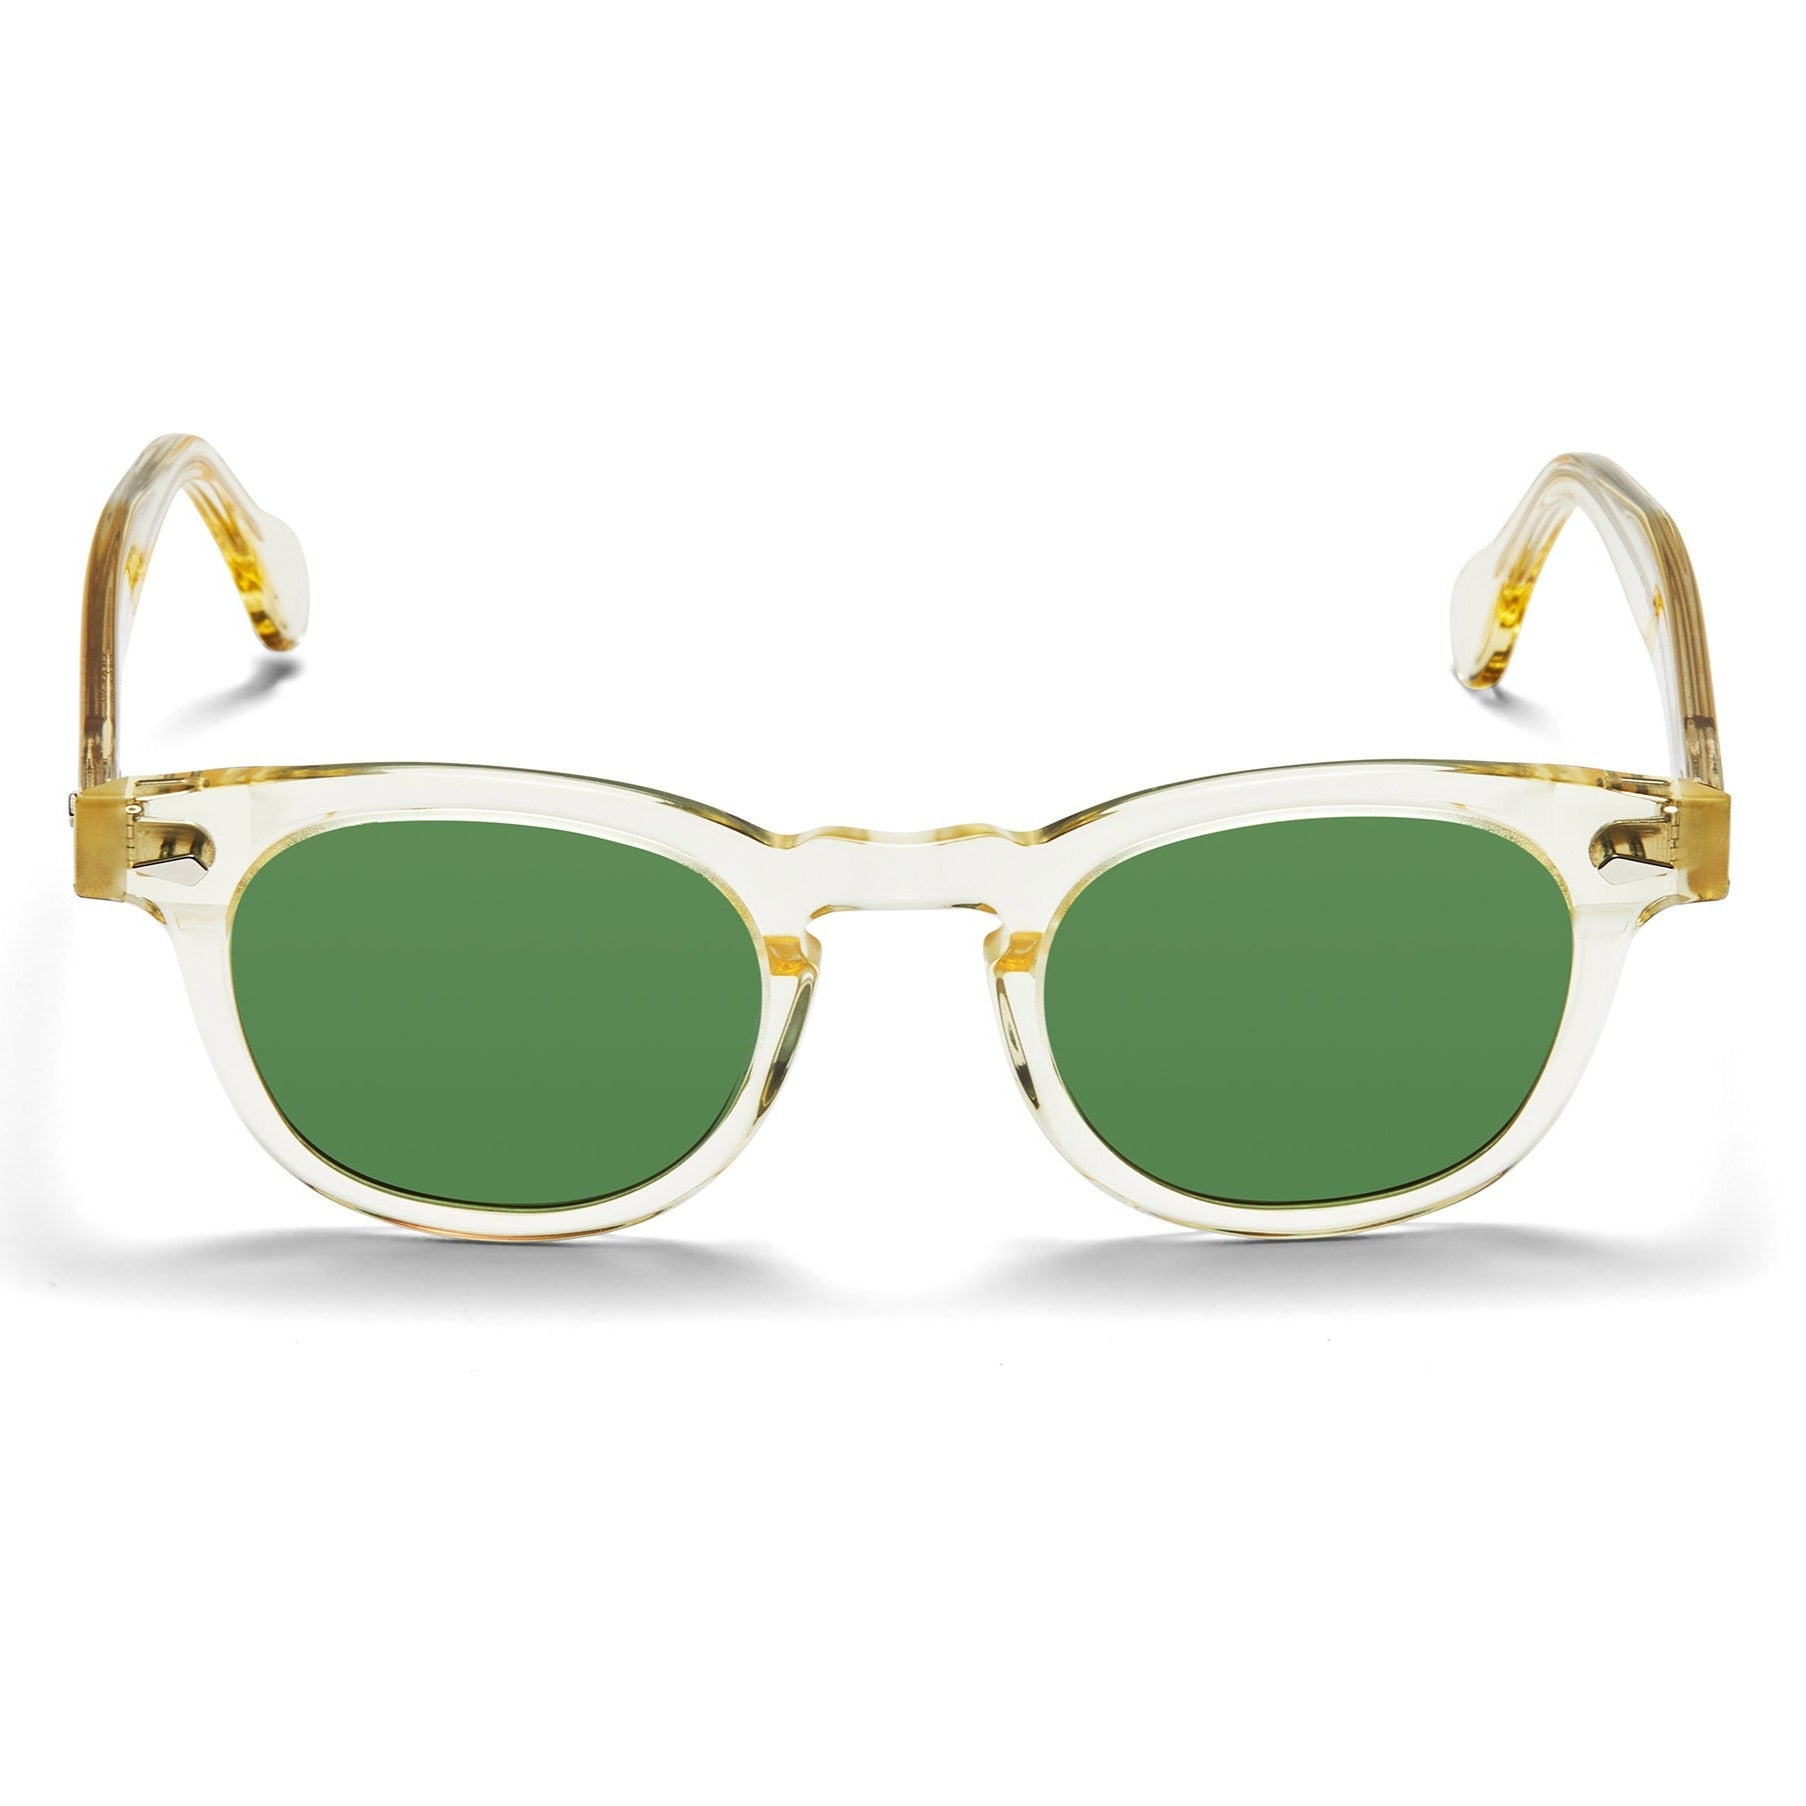 A front view of the champaign Arnel USA sunglass frame—the Vintage eyewear. 